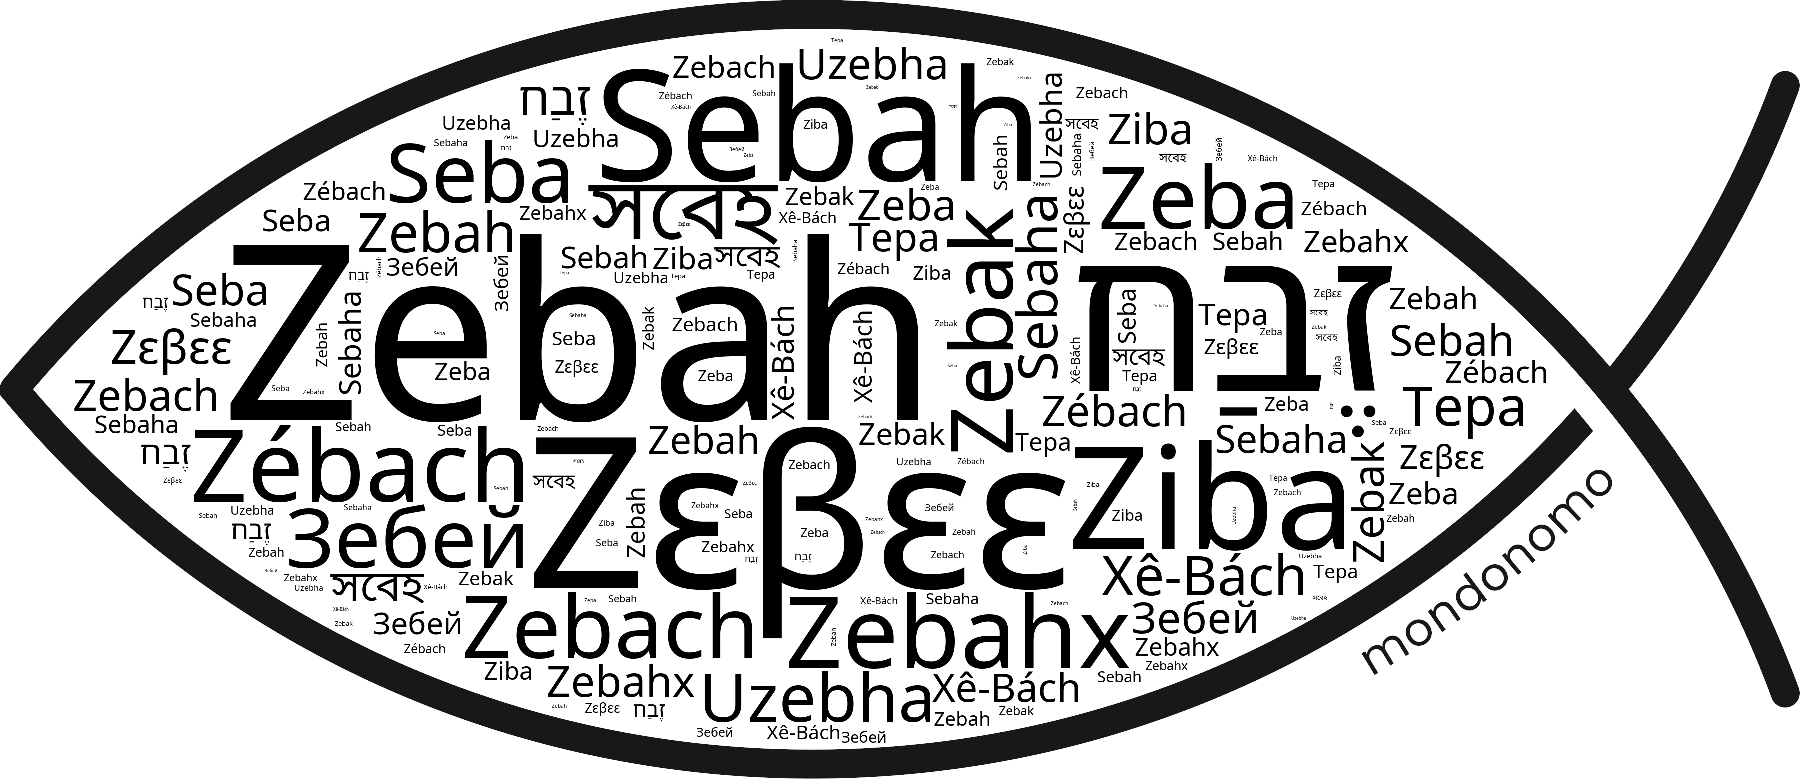 Name Zebah in the world's Bibles